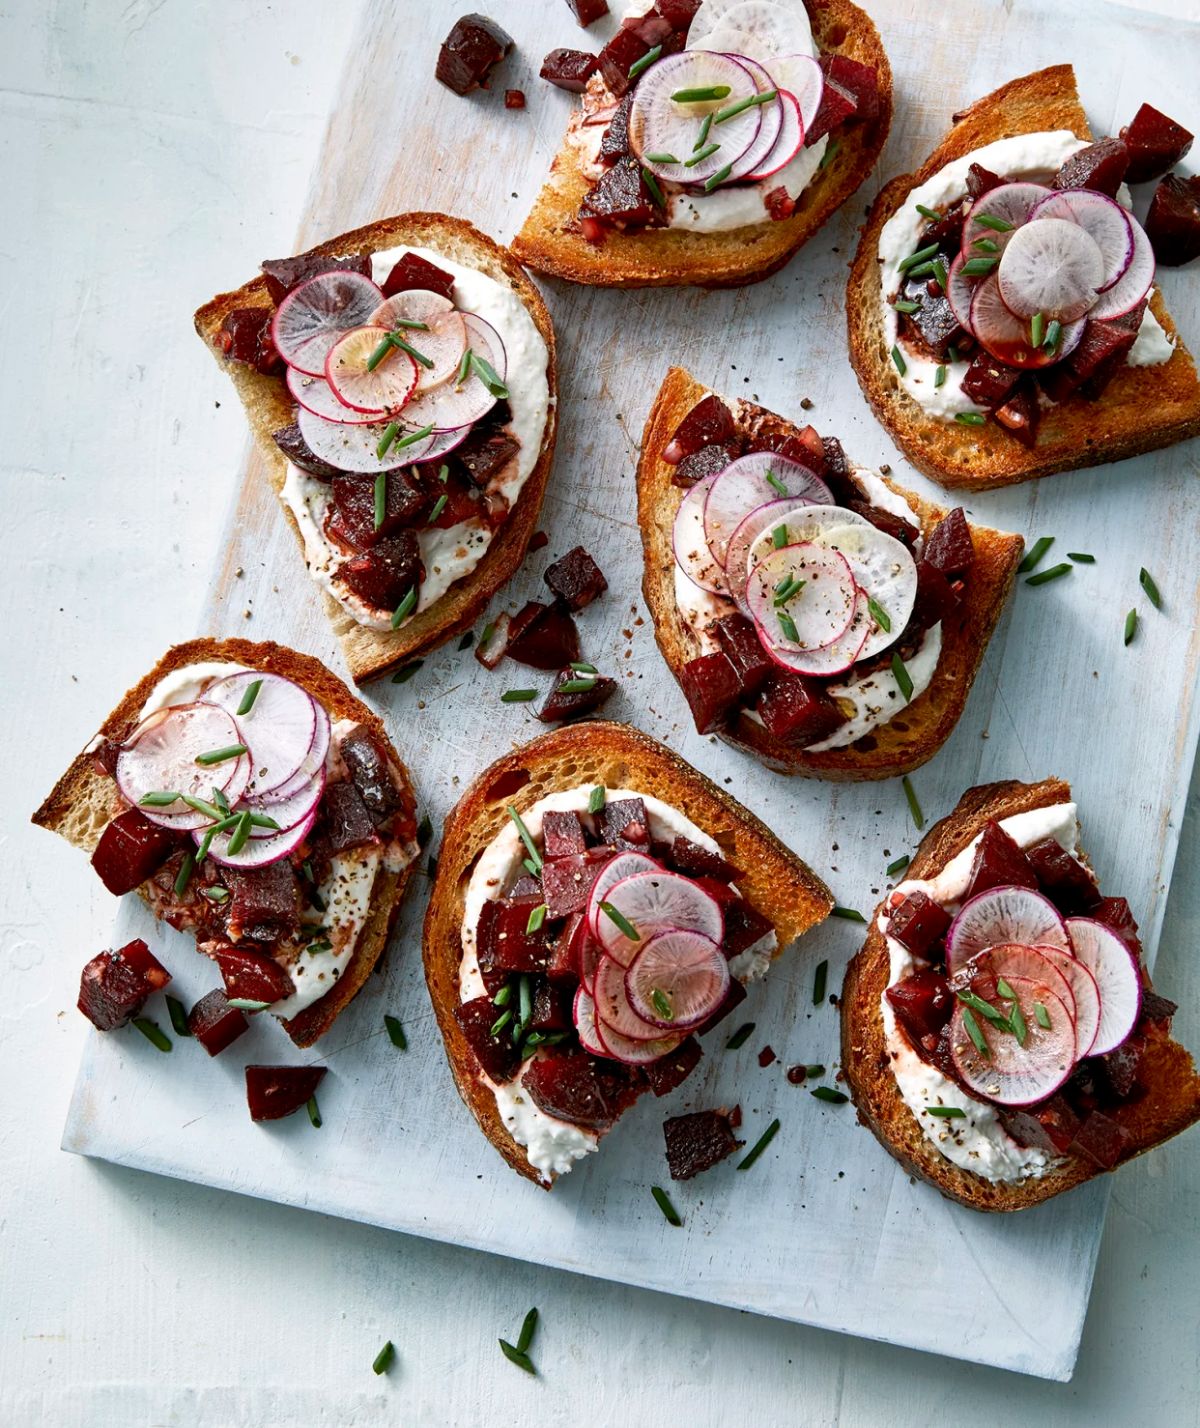 Scrumptious marinated beet toasts with yogurt on a wooden tray.